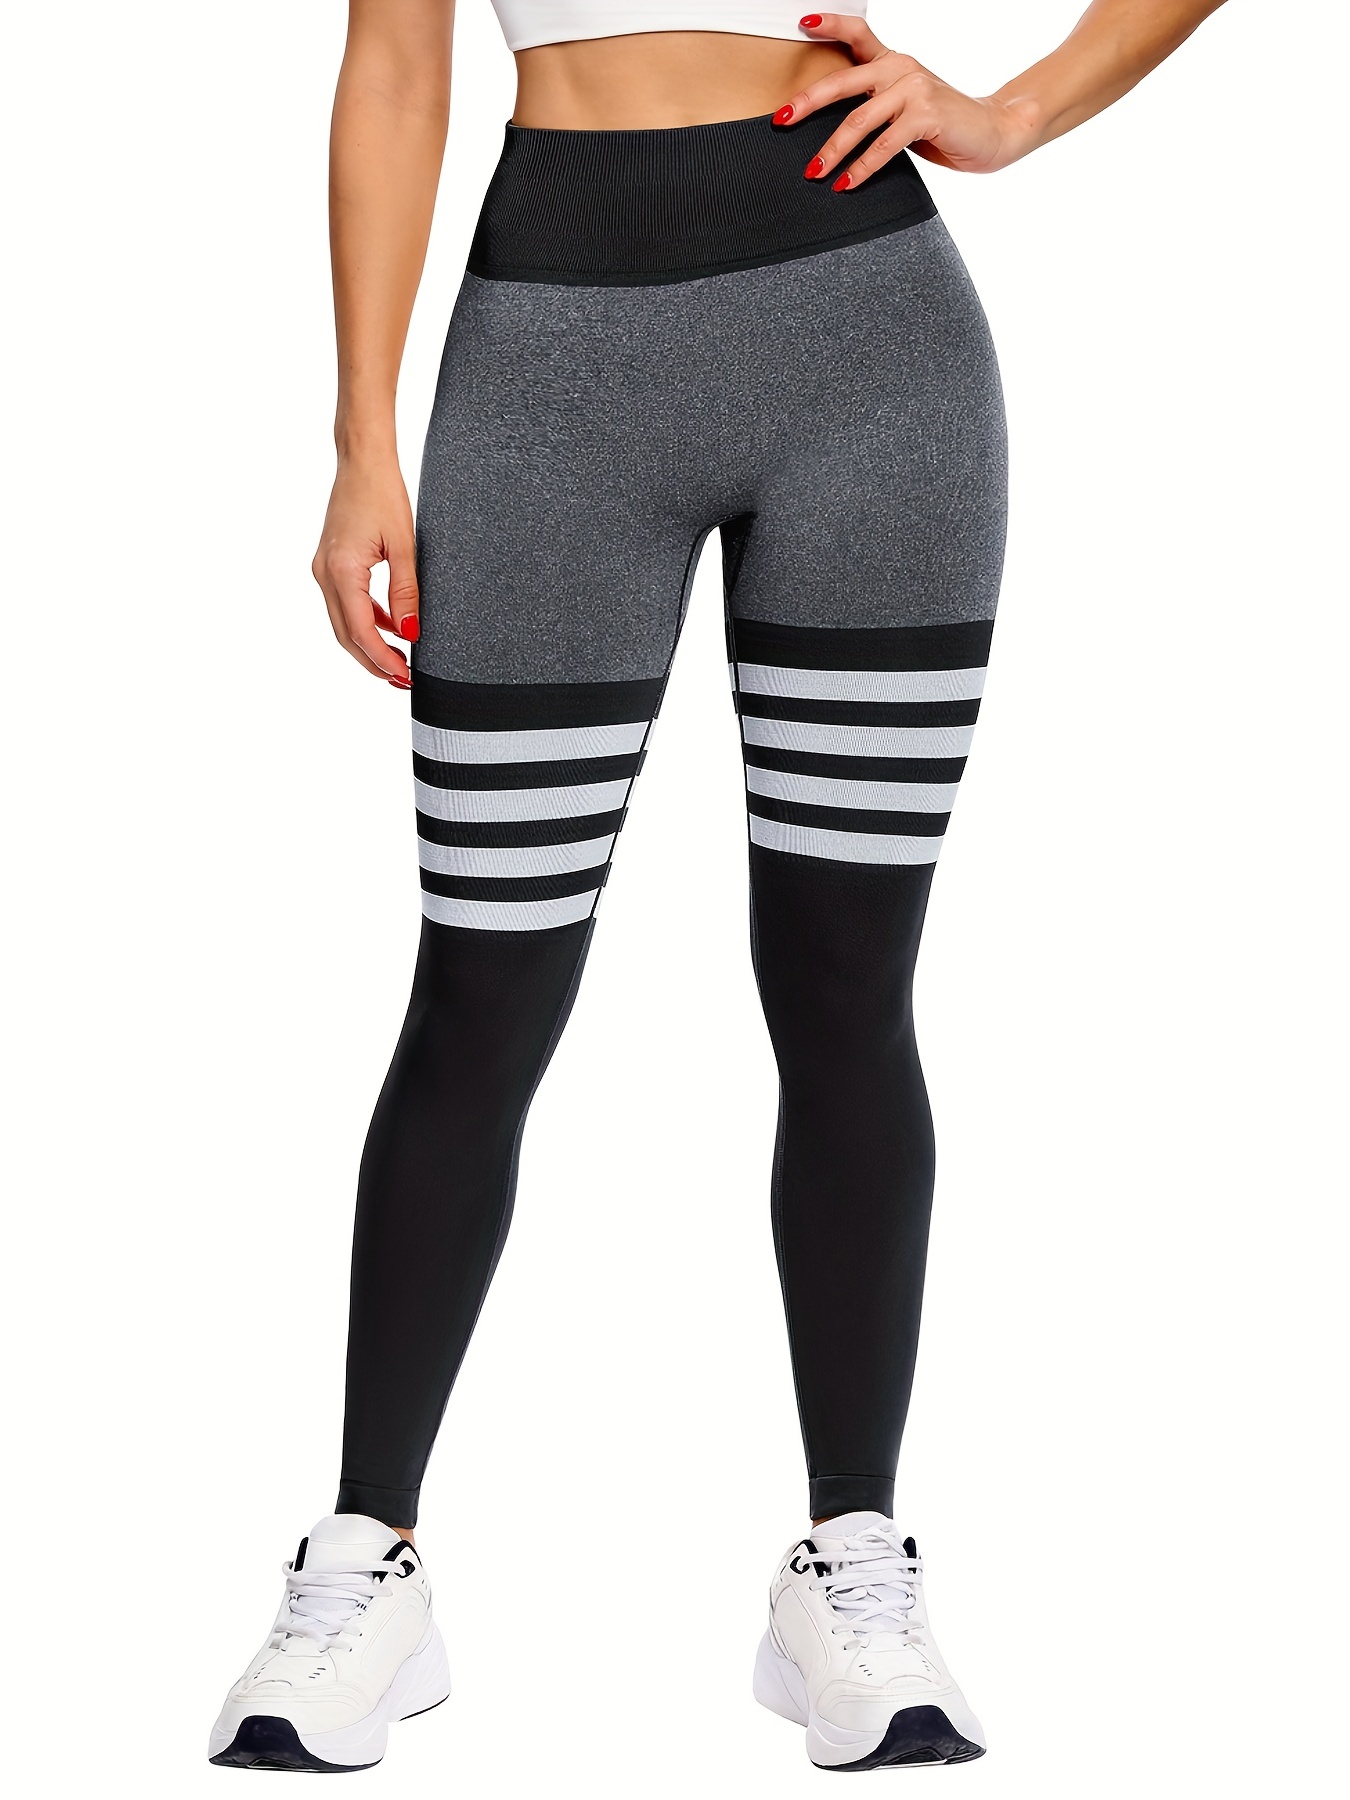 HOT and Sexy Women's Butt Lift Pants, High Waist Leggings, Fitness Workout,  5 colors – Stars and Stripes Design – Your Megastore